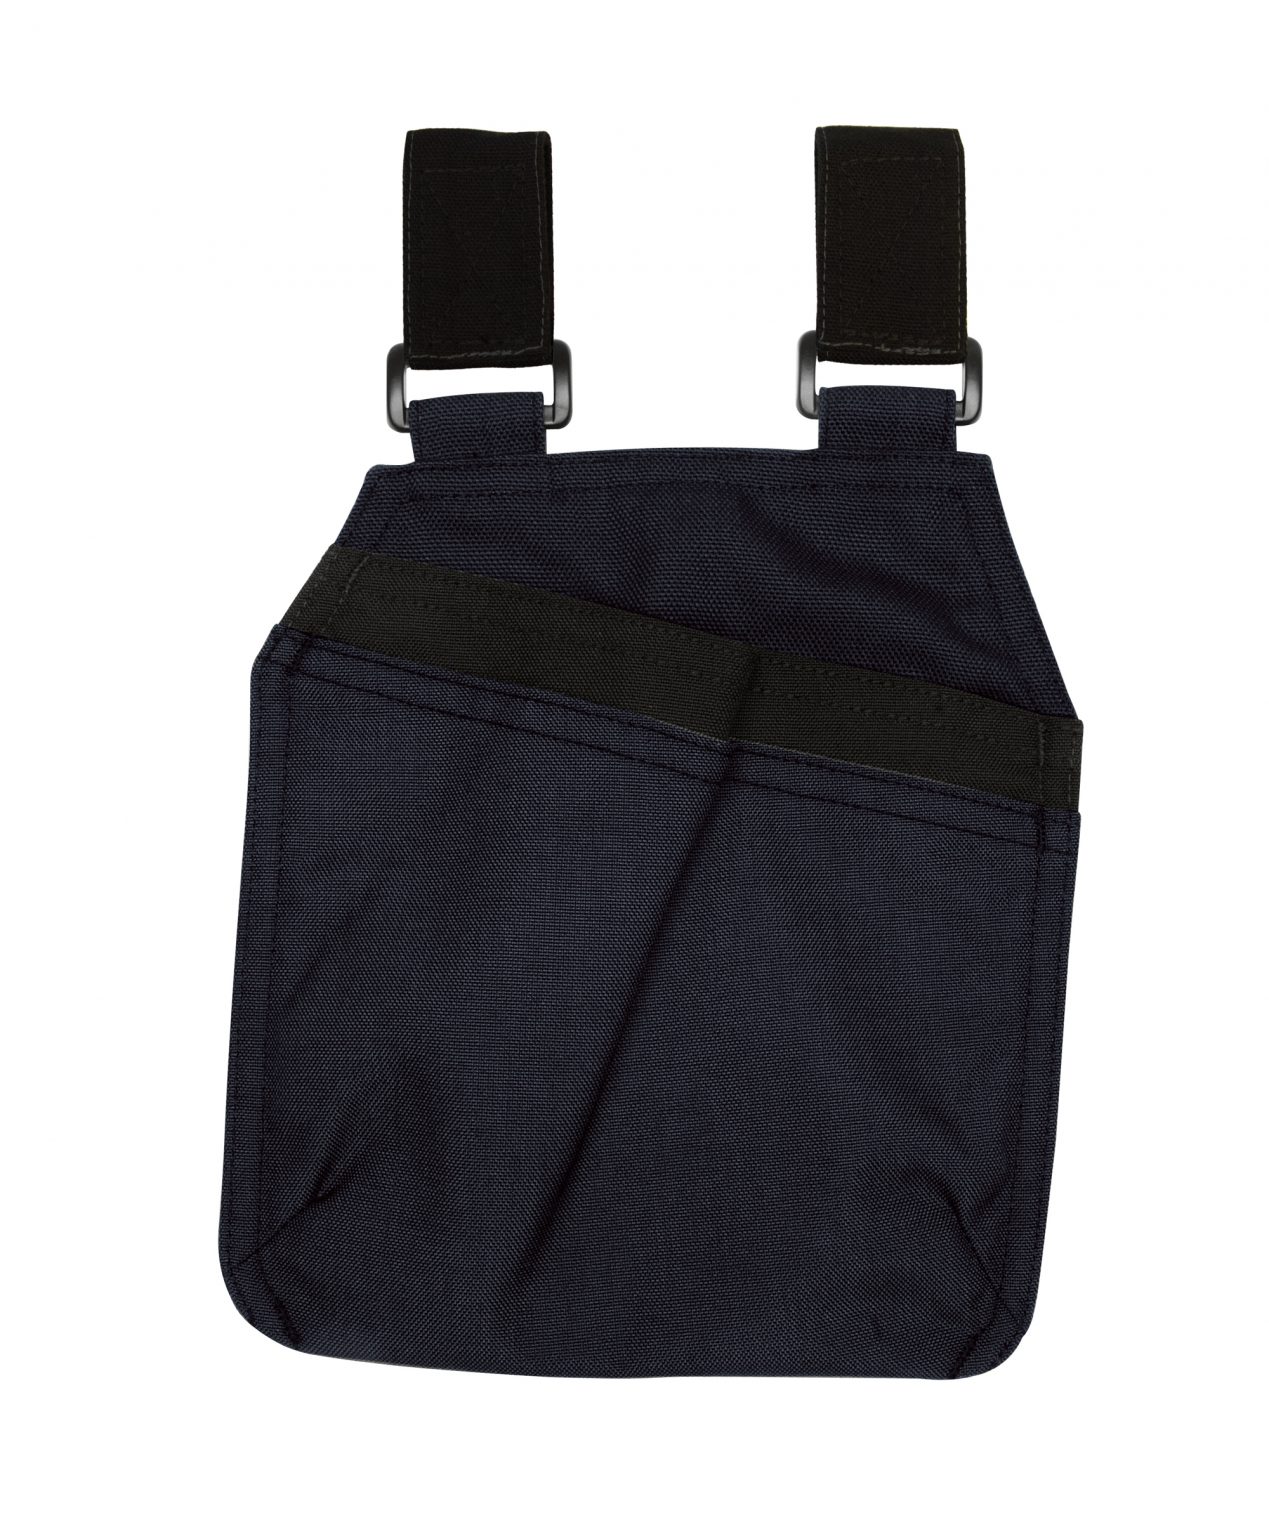 gordon with loops canvas tool pouches per pair with velcro loops midnight blue black back